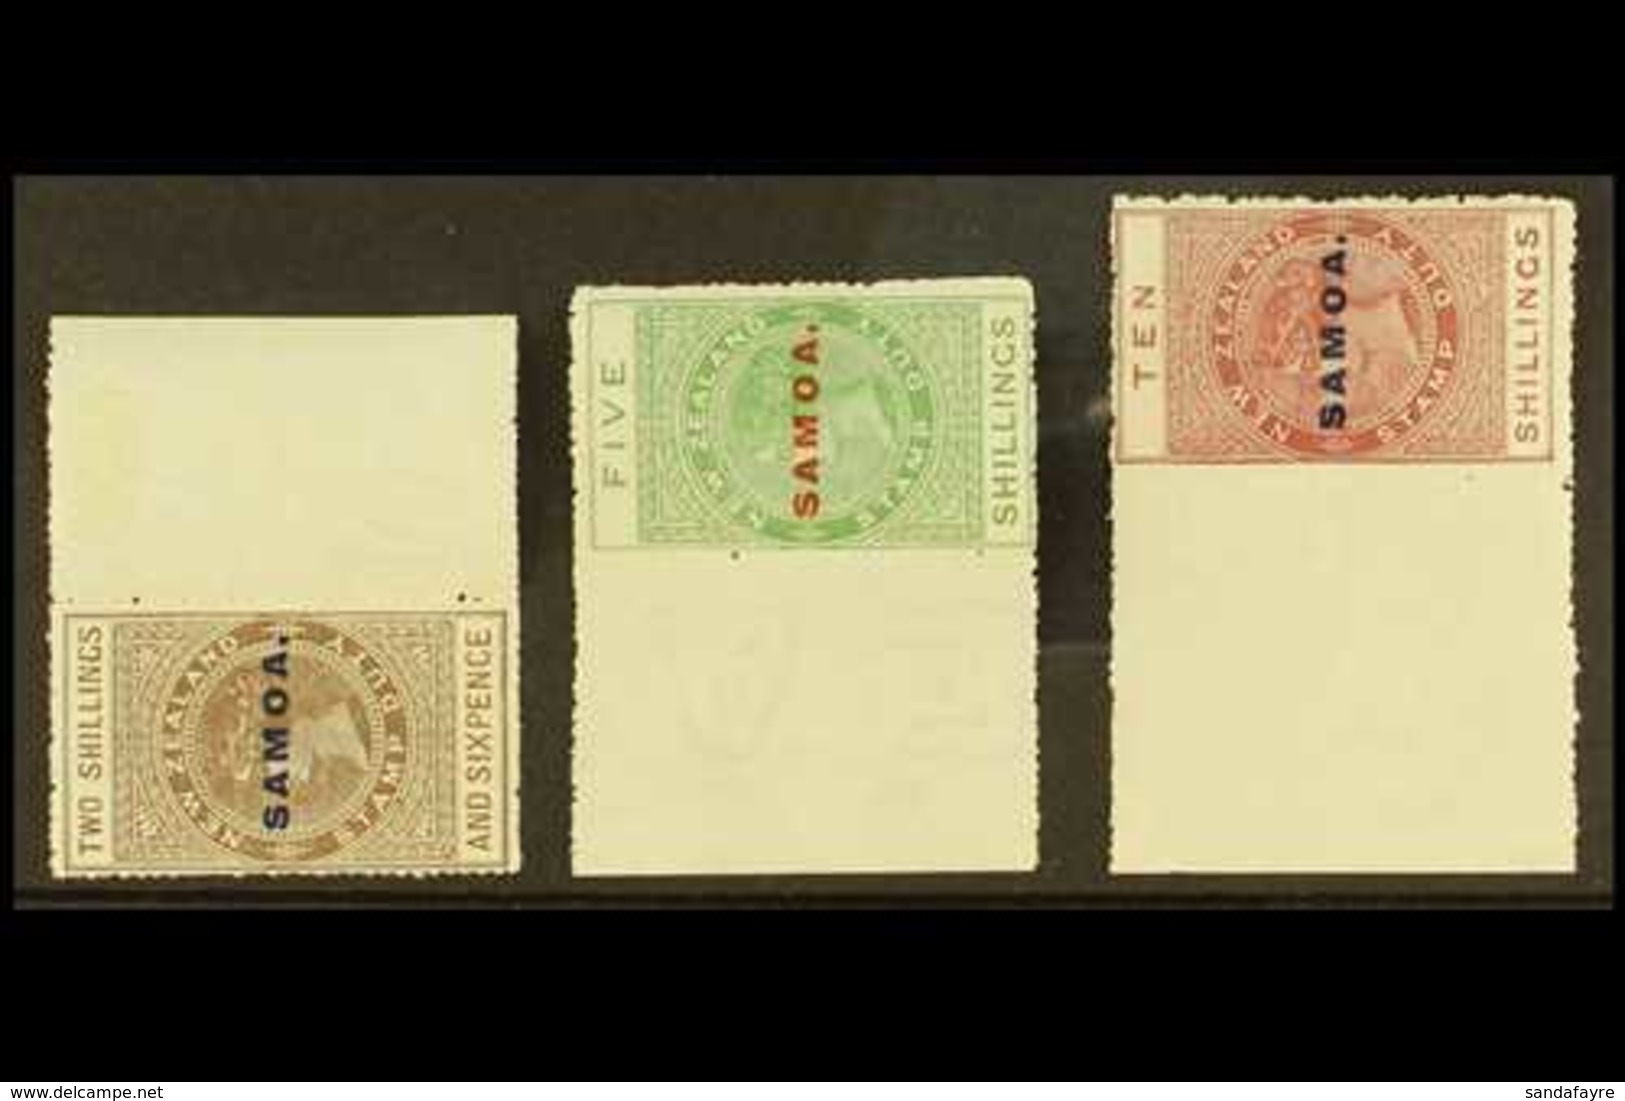 1914-24  2s6d, 5s, And 10s, Perf 14, Overprints On Postal Fiscals, SG 123/125, Each As Mint Marginals. (3 Stamps) For Mo - Samoa